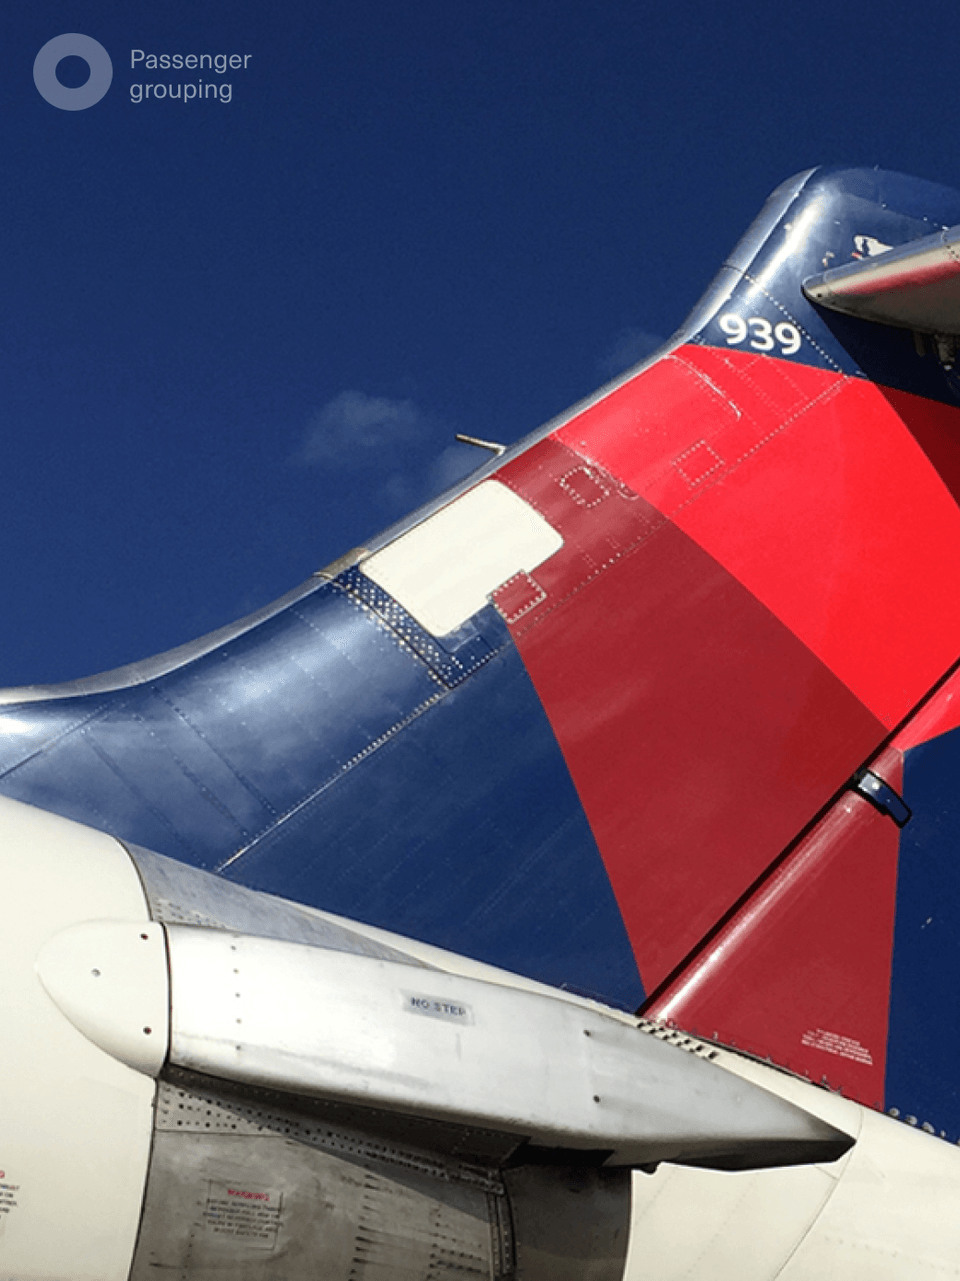 Close-up of the tail of a Delta aircraft.